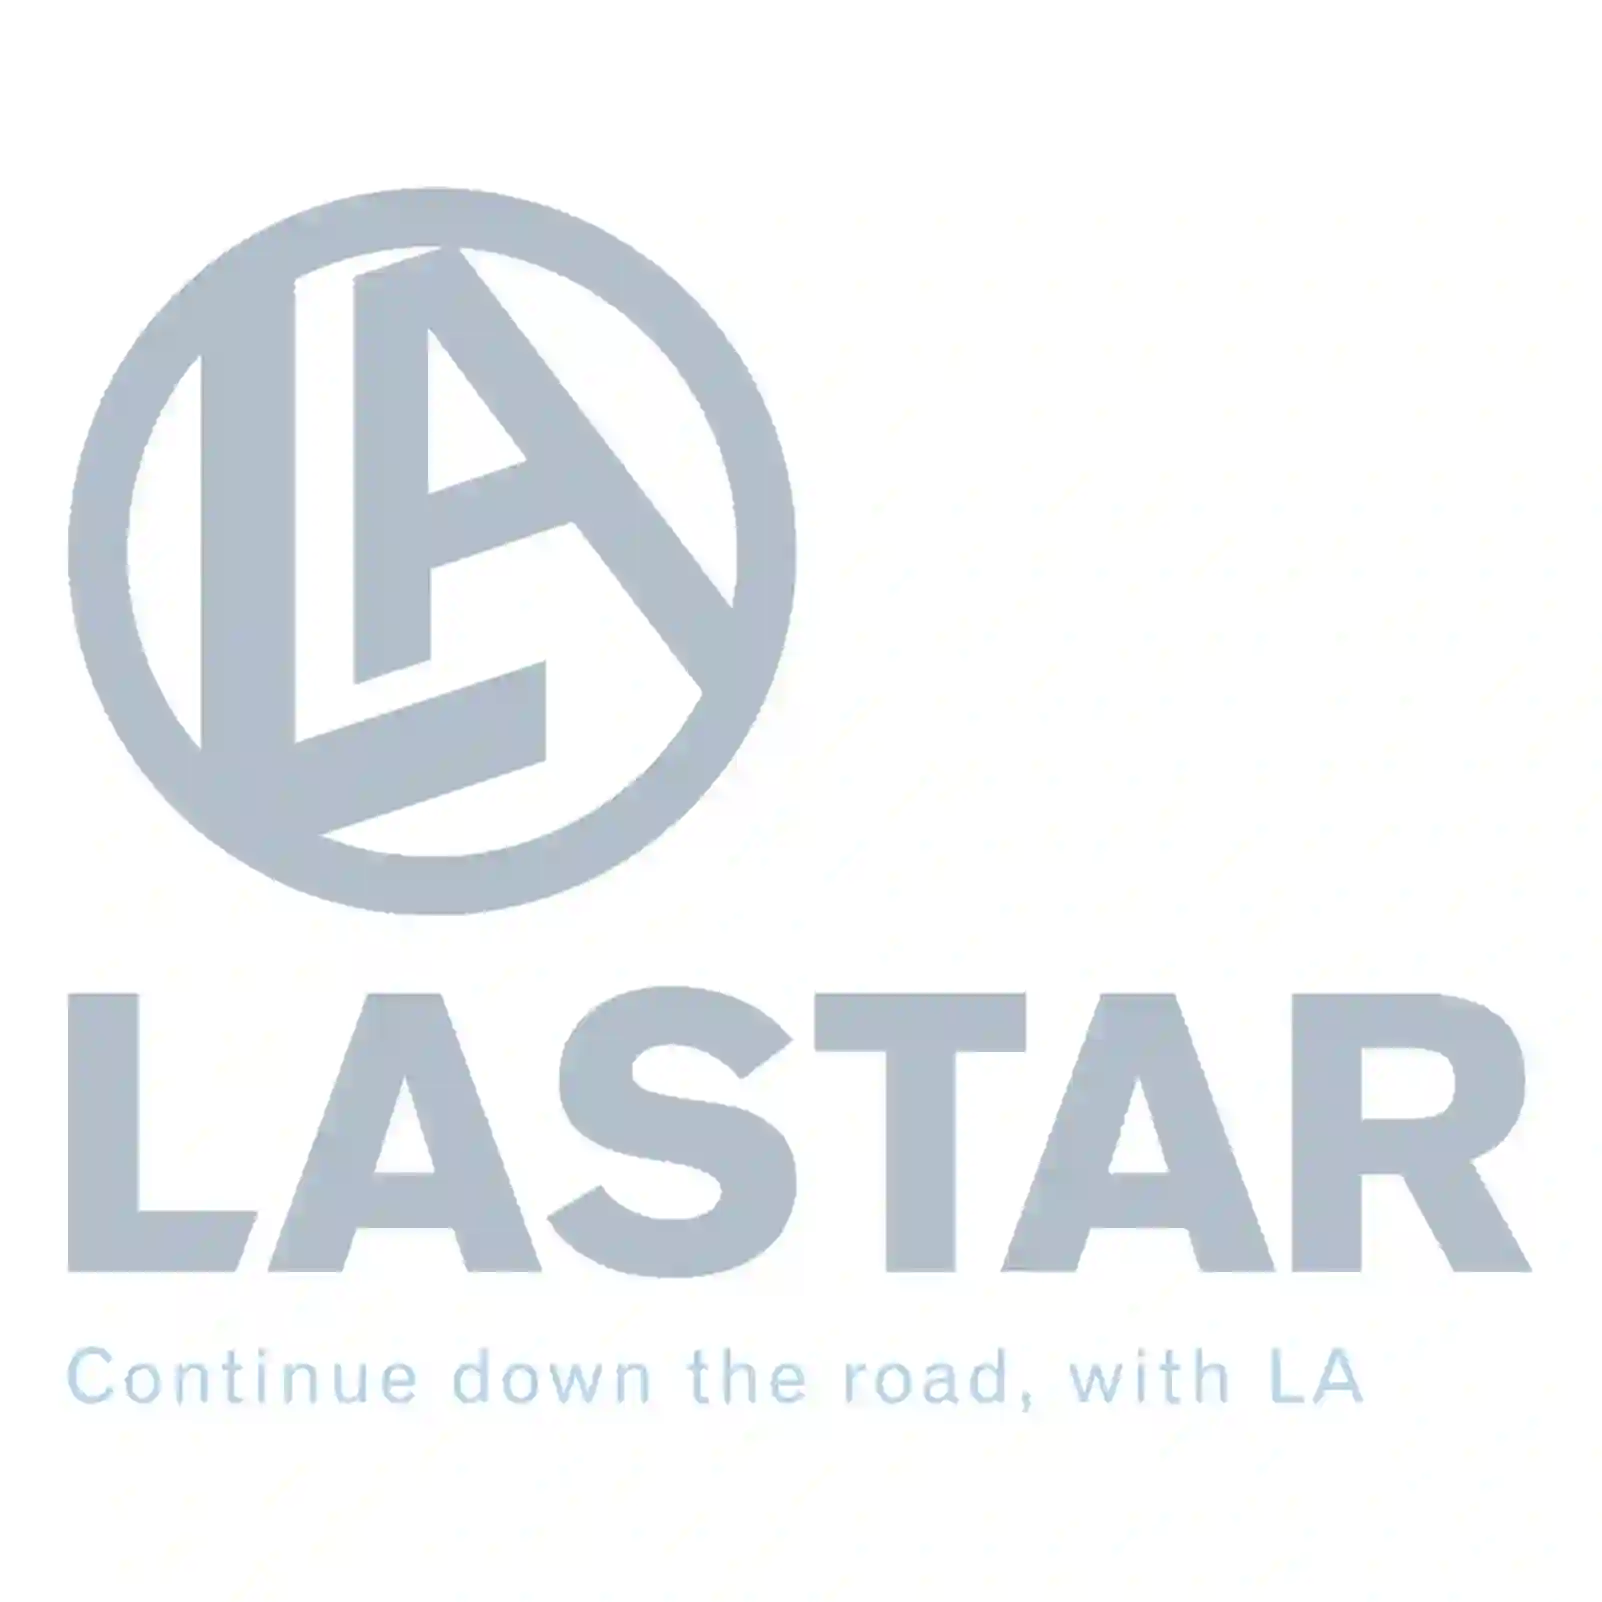  Spring brake cylinder, right, without bracket || Lastar Spare Part | Truck Spare Parts, Auotomotive Spare Parts